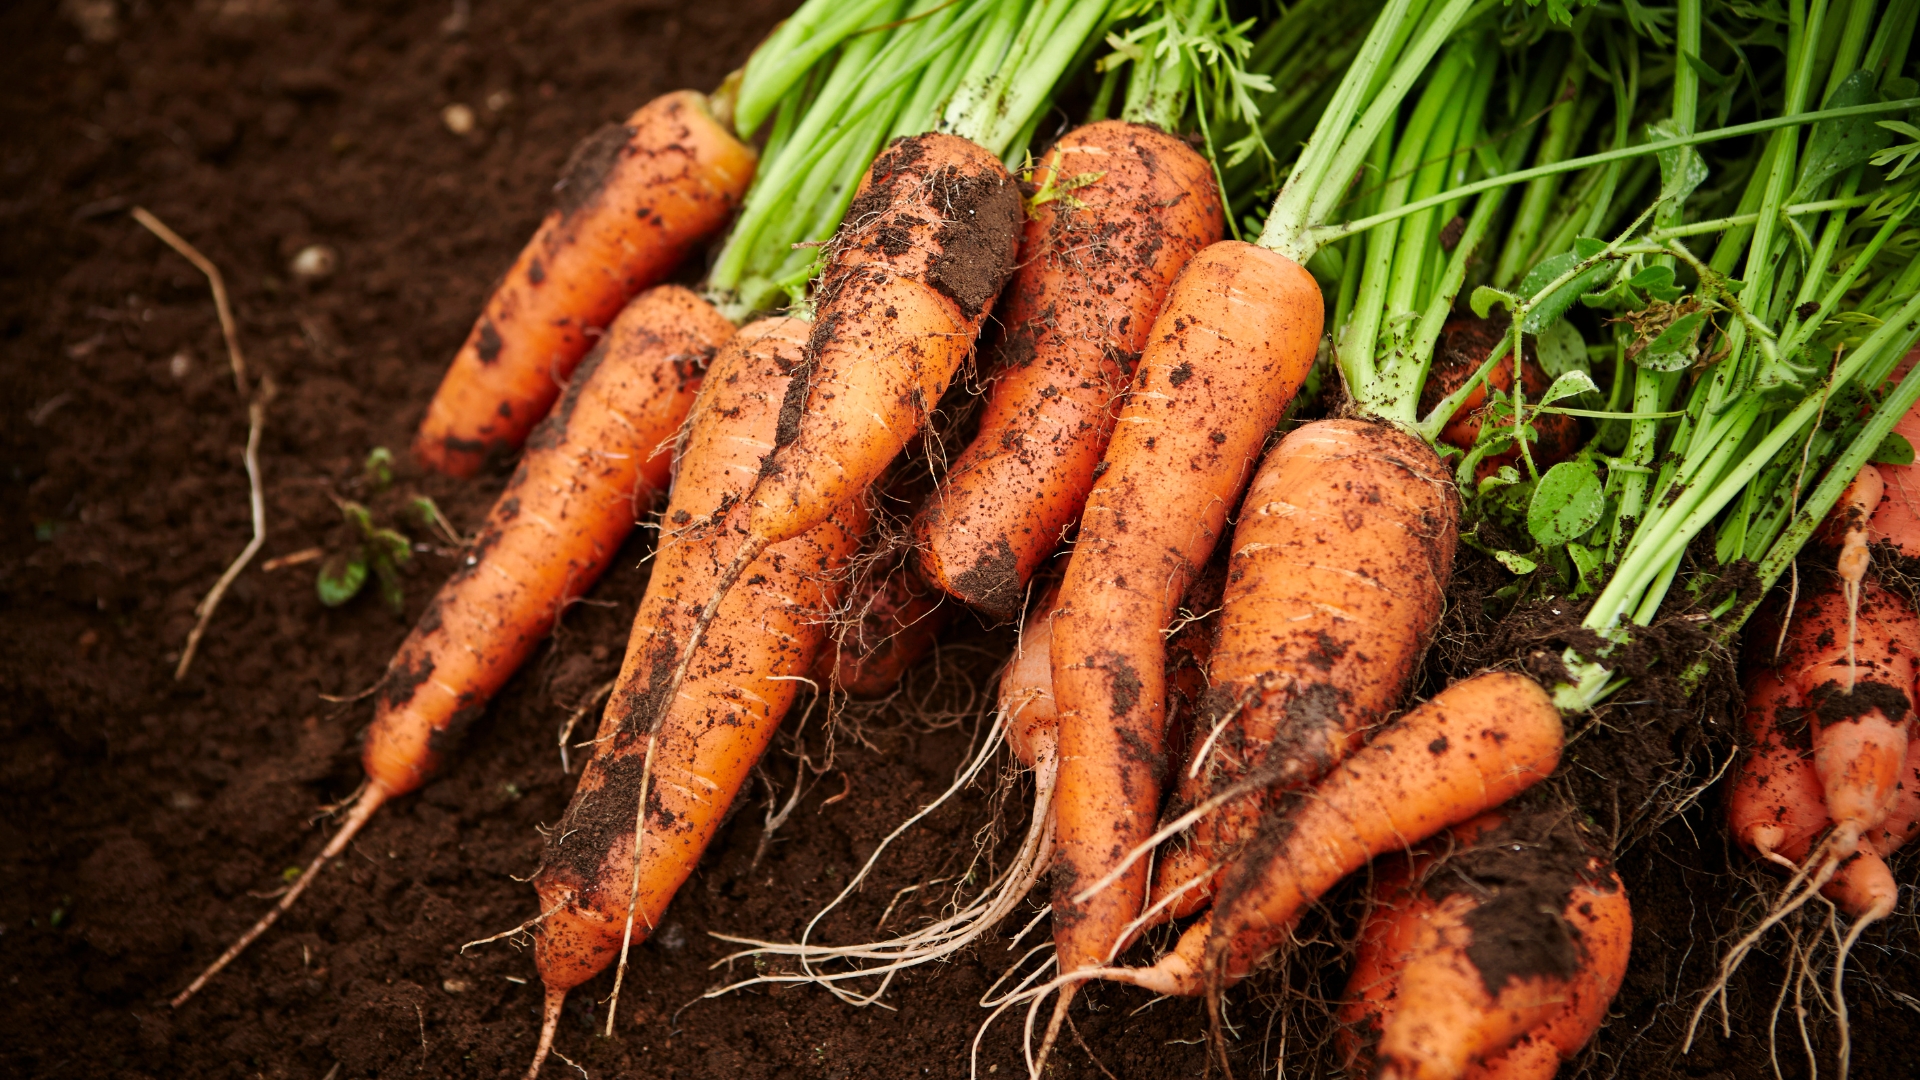 When To Plant Carrots Based On Your Growing Zone 